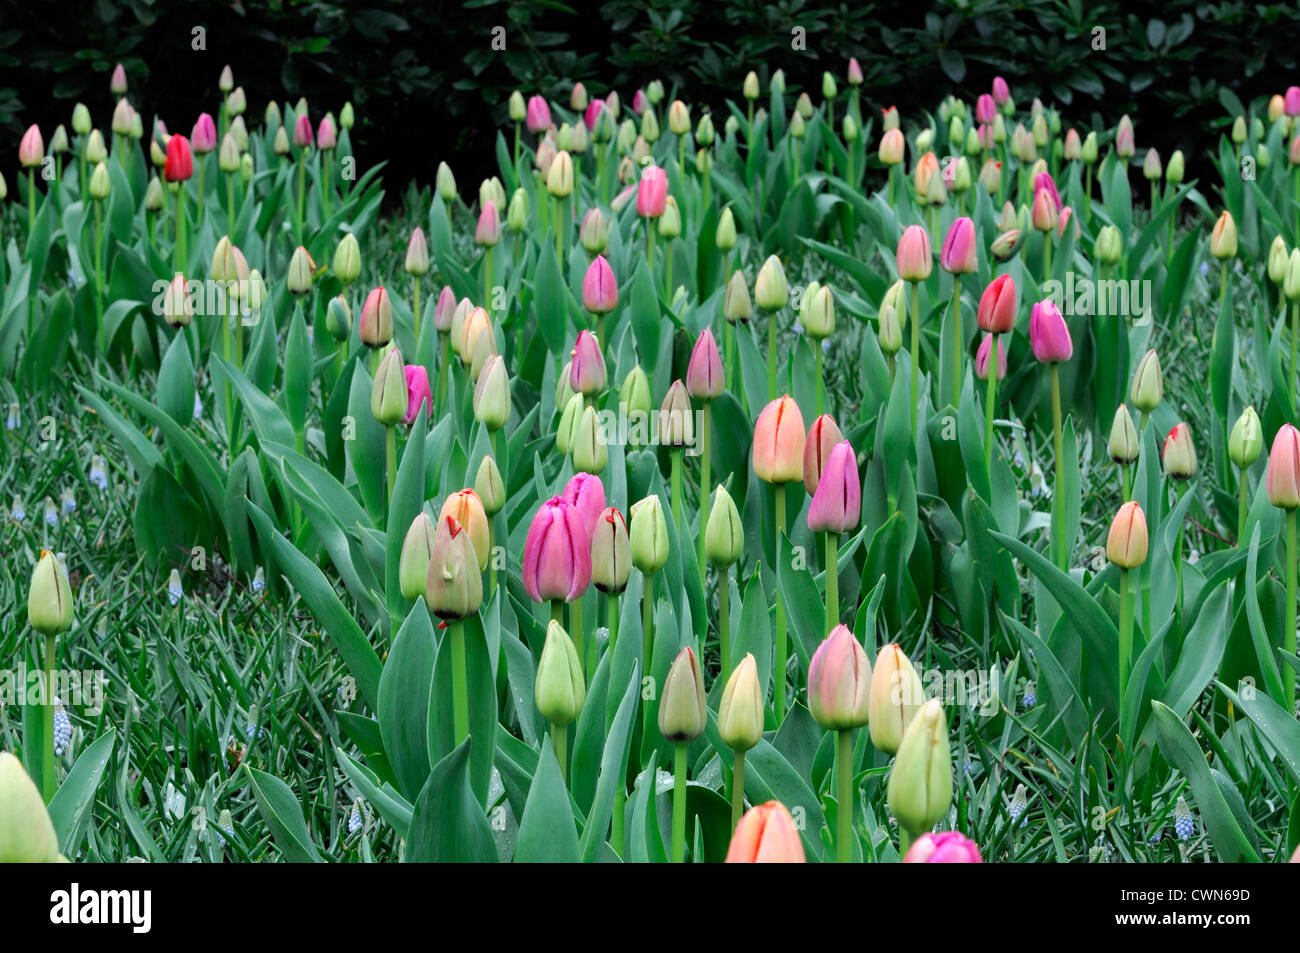 tulipa zantupink Pink tulip garden flowers spring flower bloom blossom display bed colour color bulb bulbous darwin hybrid Stock Photo